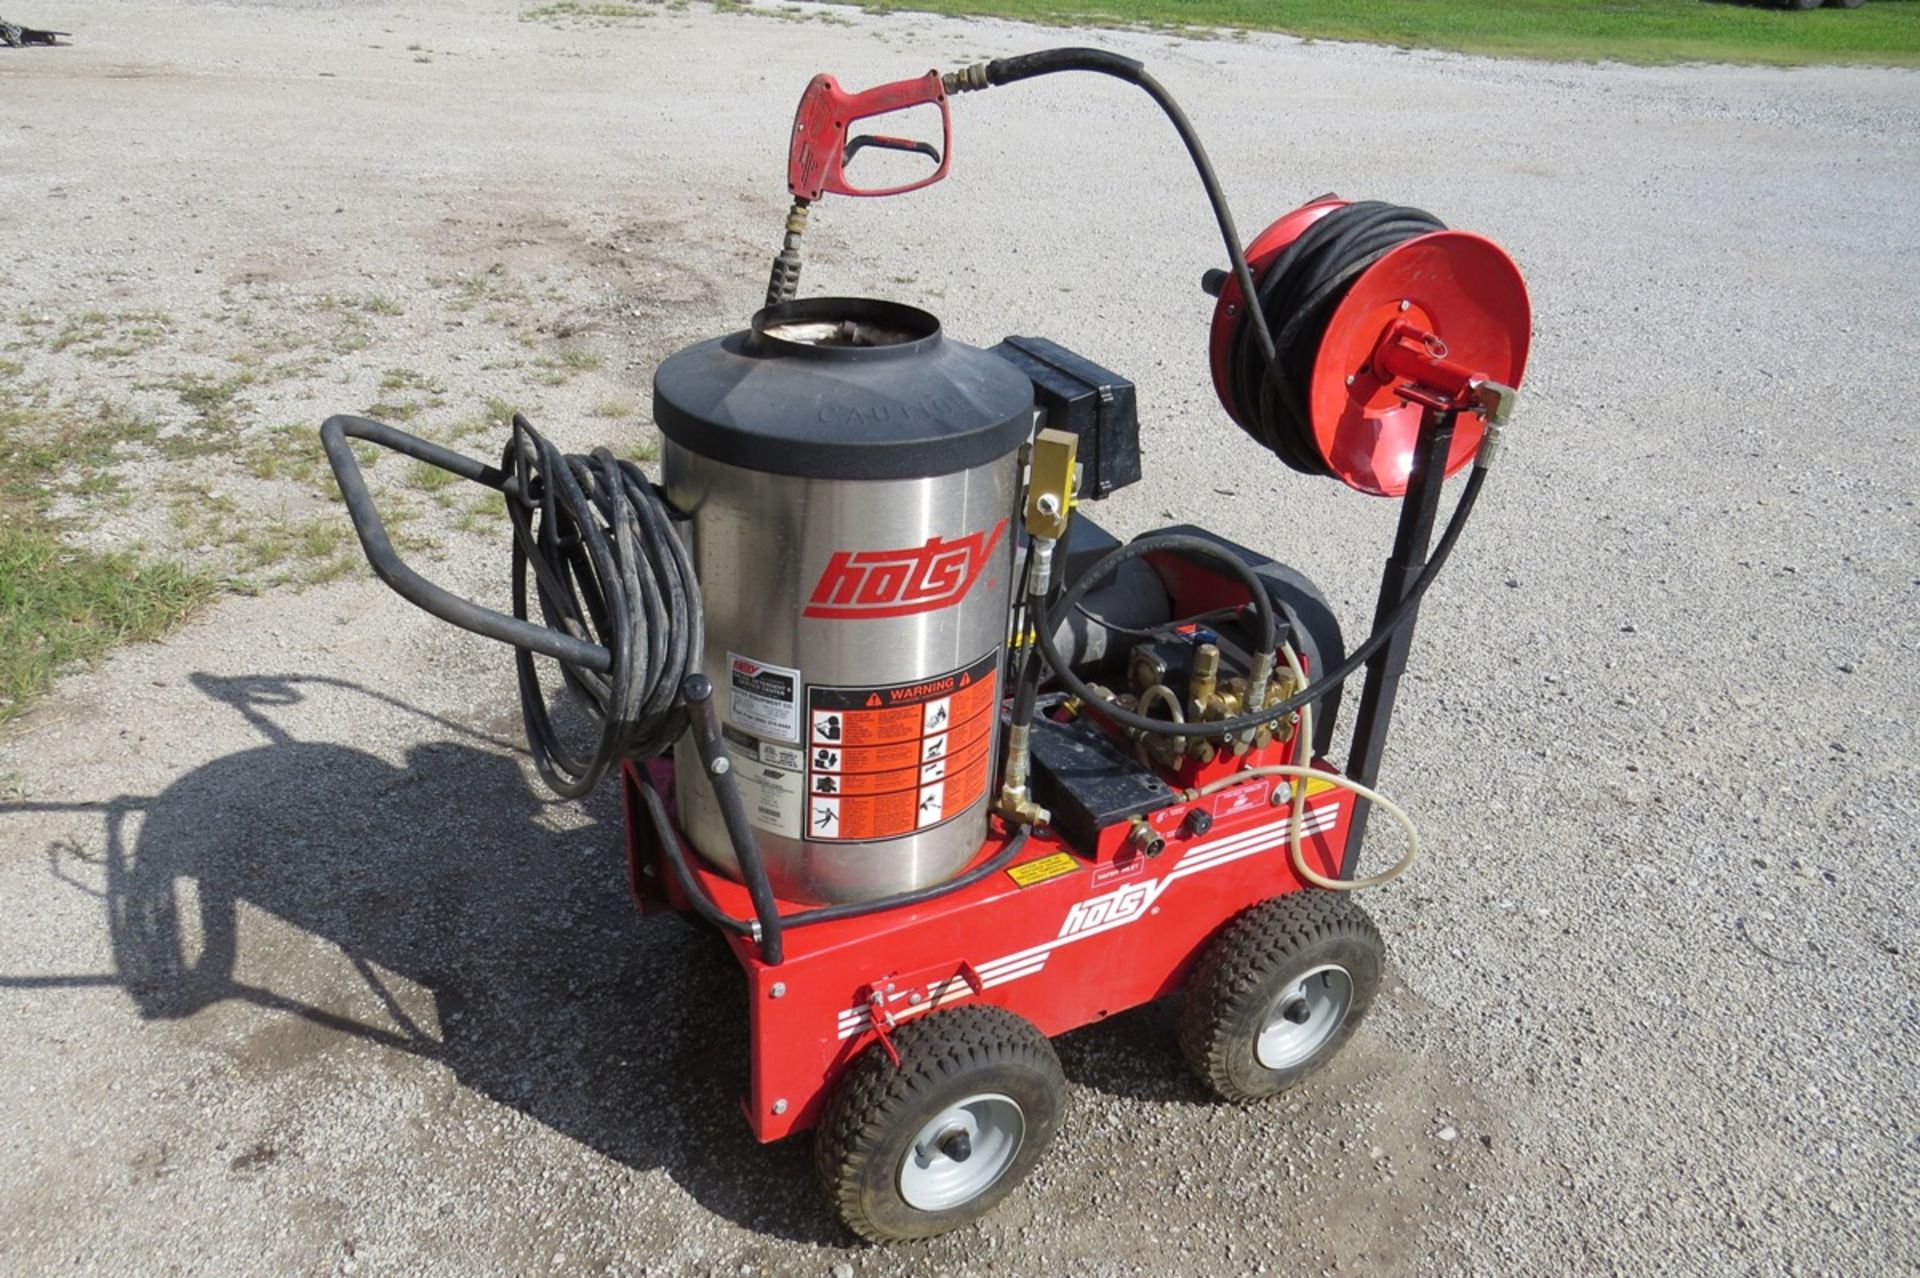 Hotsy Model 795SS SS Portable Hot Water Pressure Washer, SN# 11090390-163836, 2000 PSI, 3.5 Gallon/